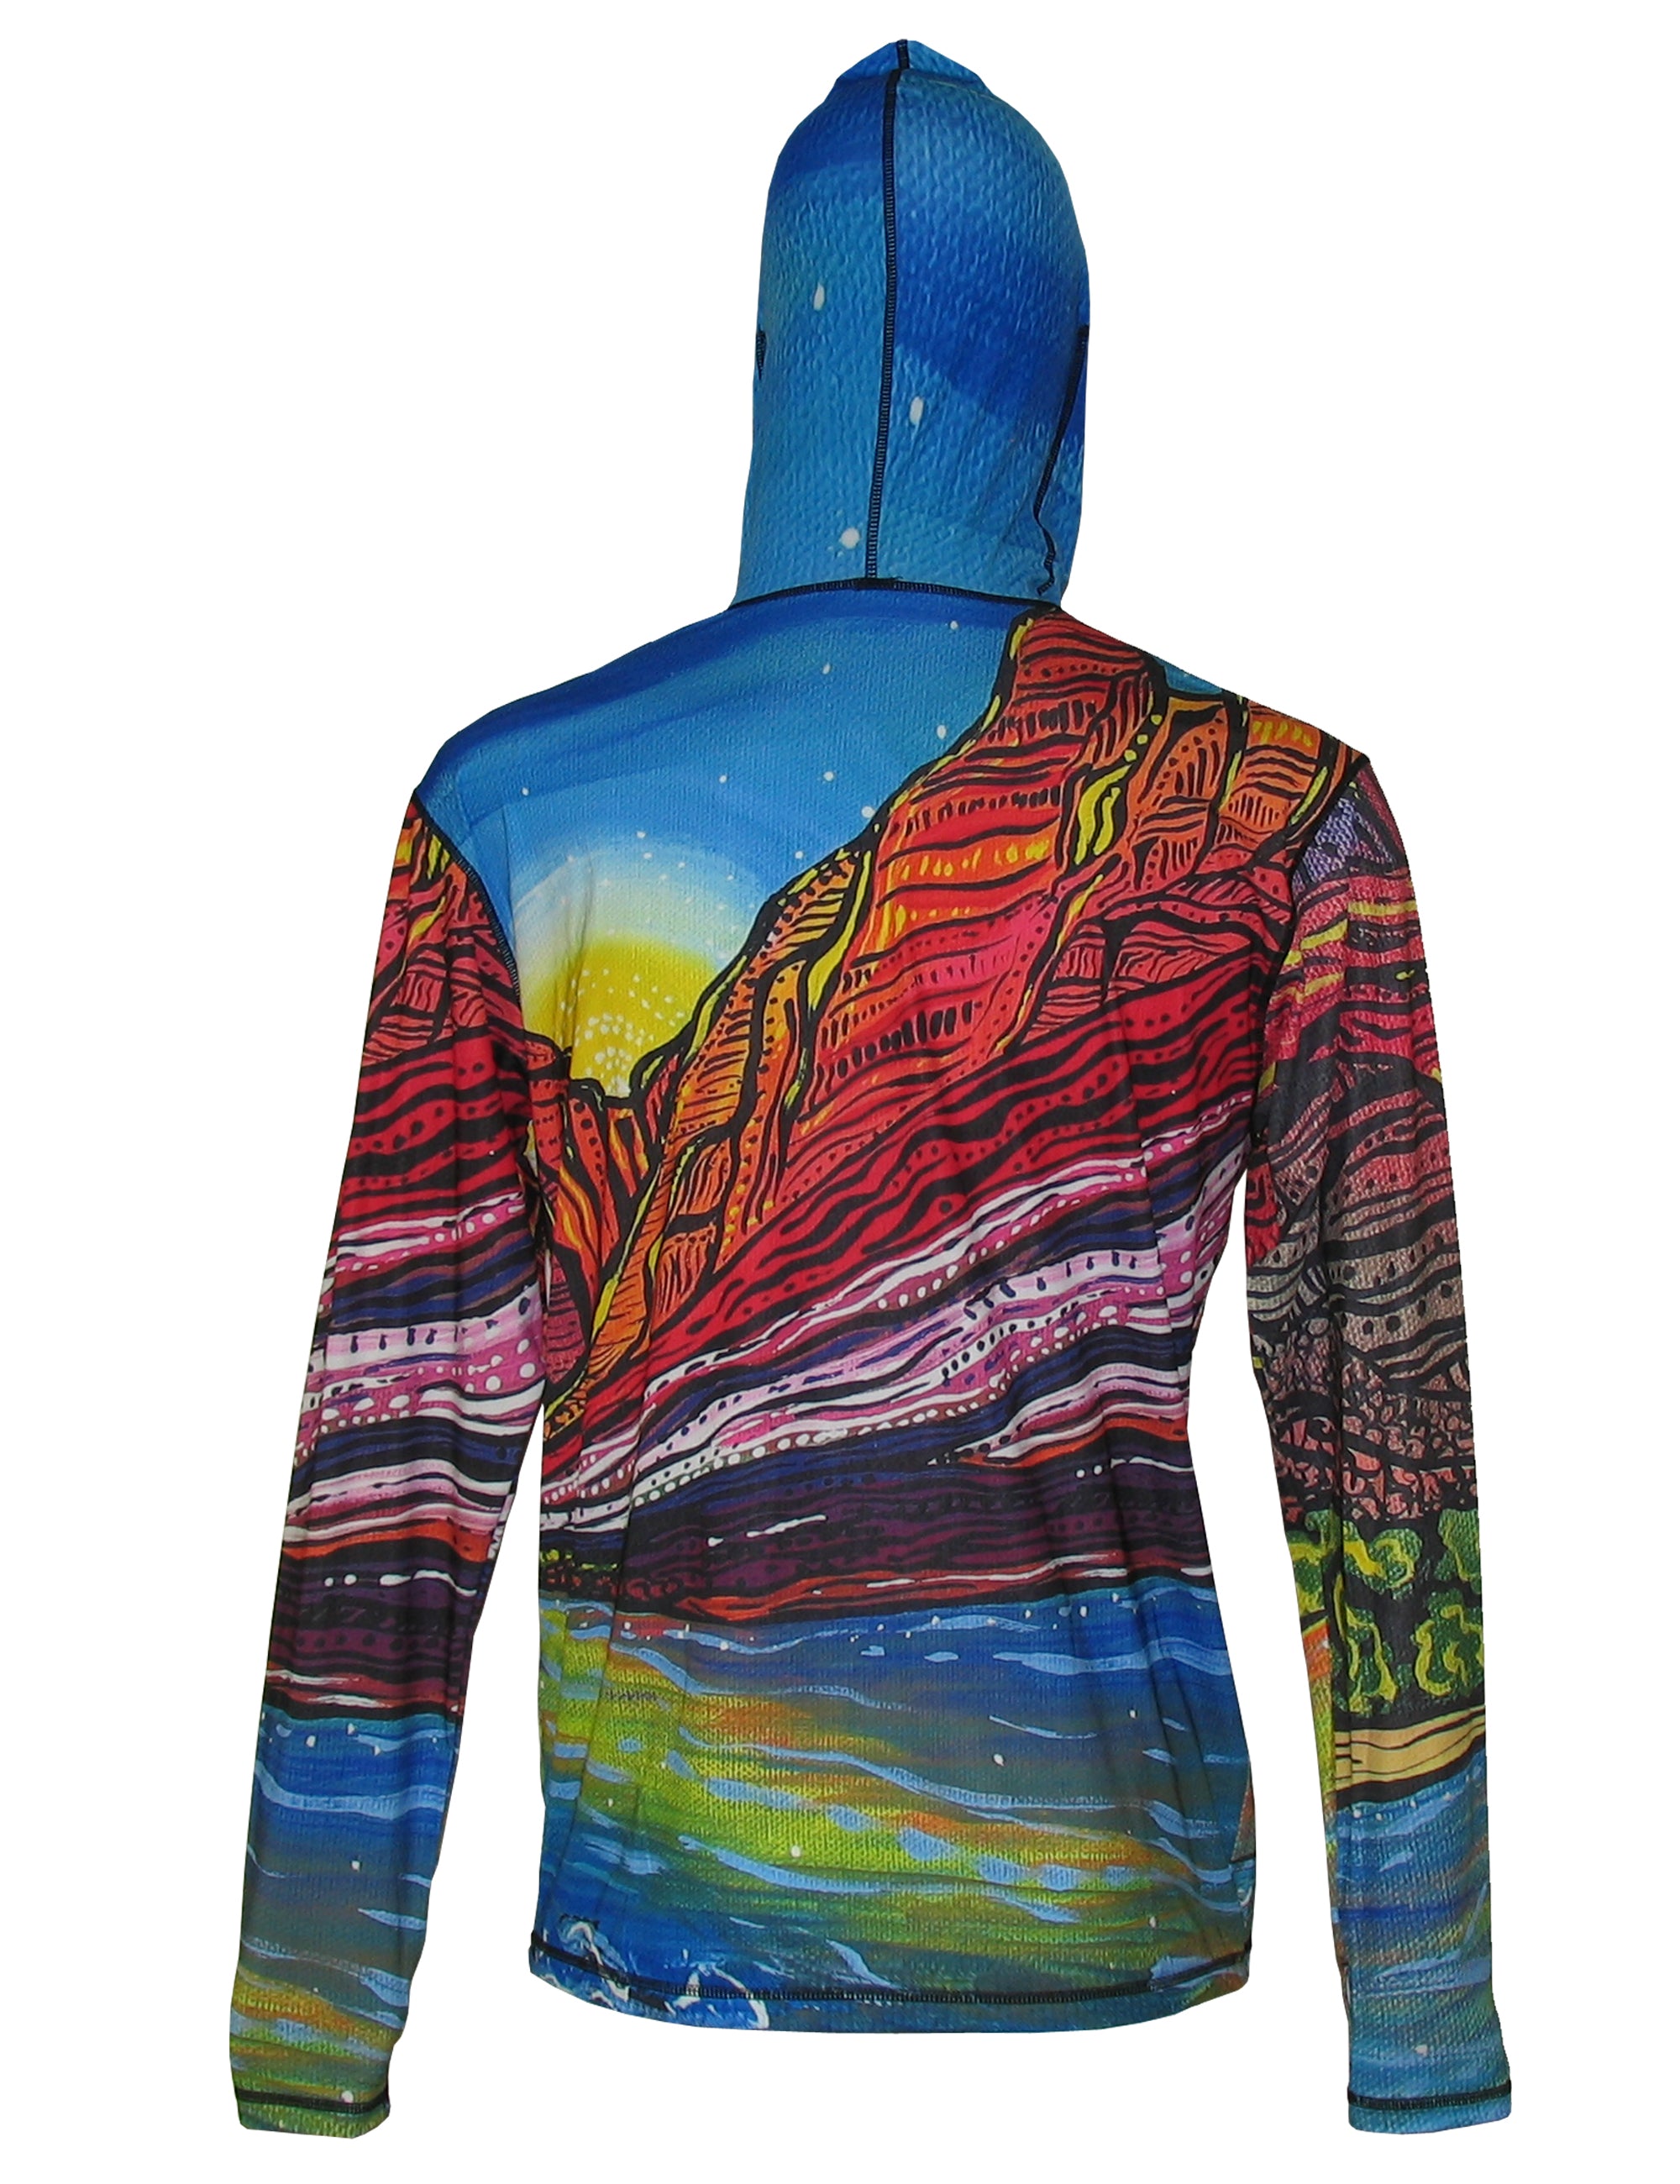 Middle Fork Sunpro Hoodie | Outdoor Clothing and Apparel